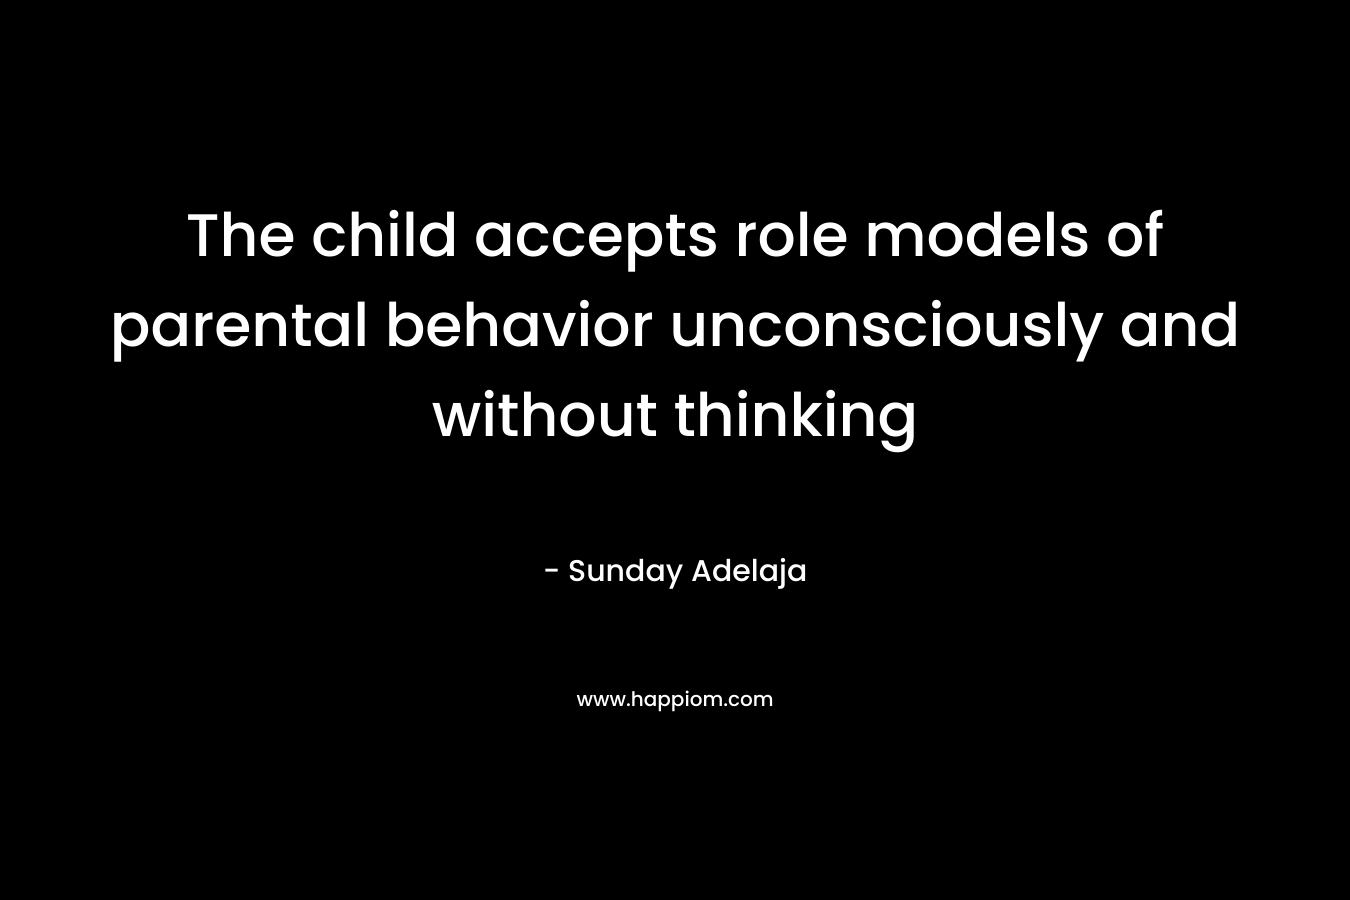 The child accepts role models of parental behavior unconsciously and without thinking